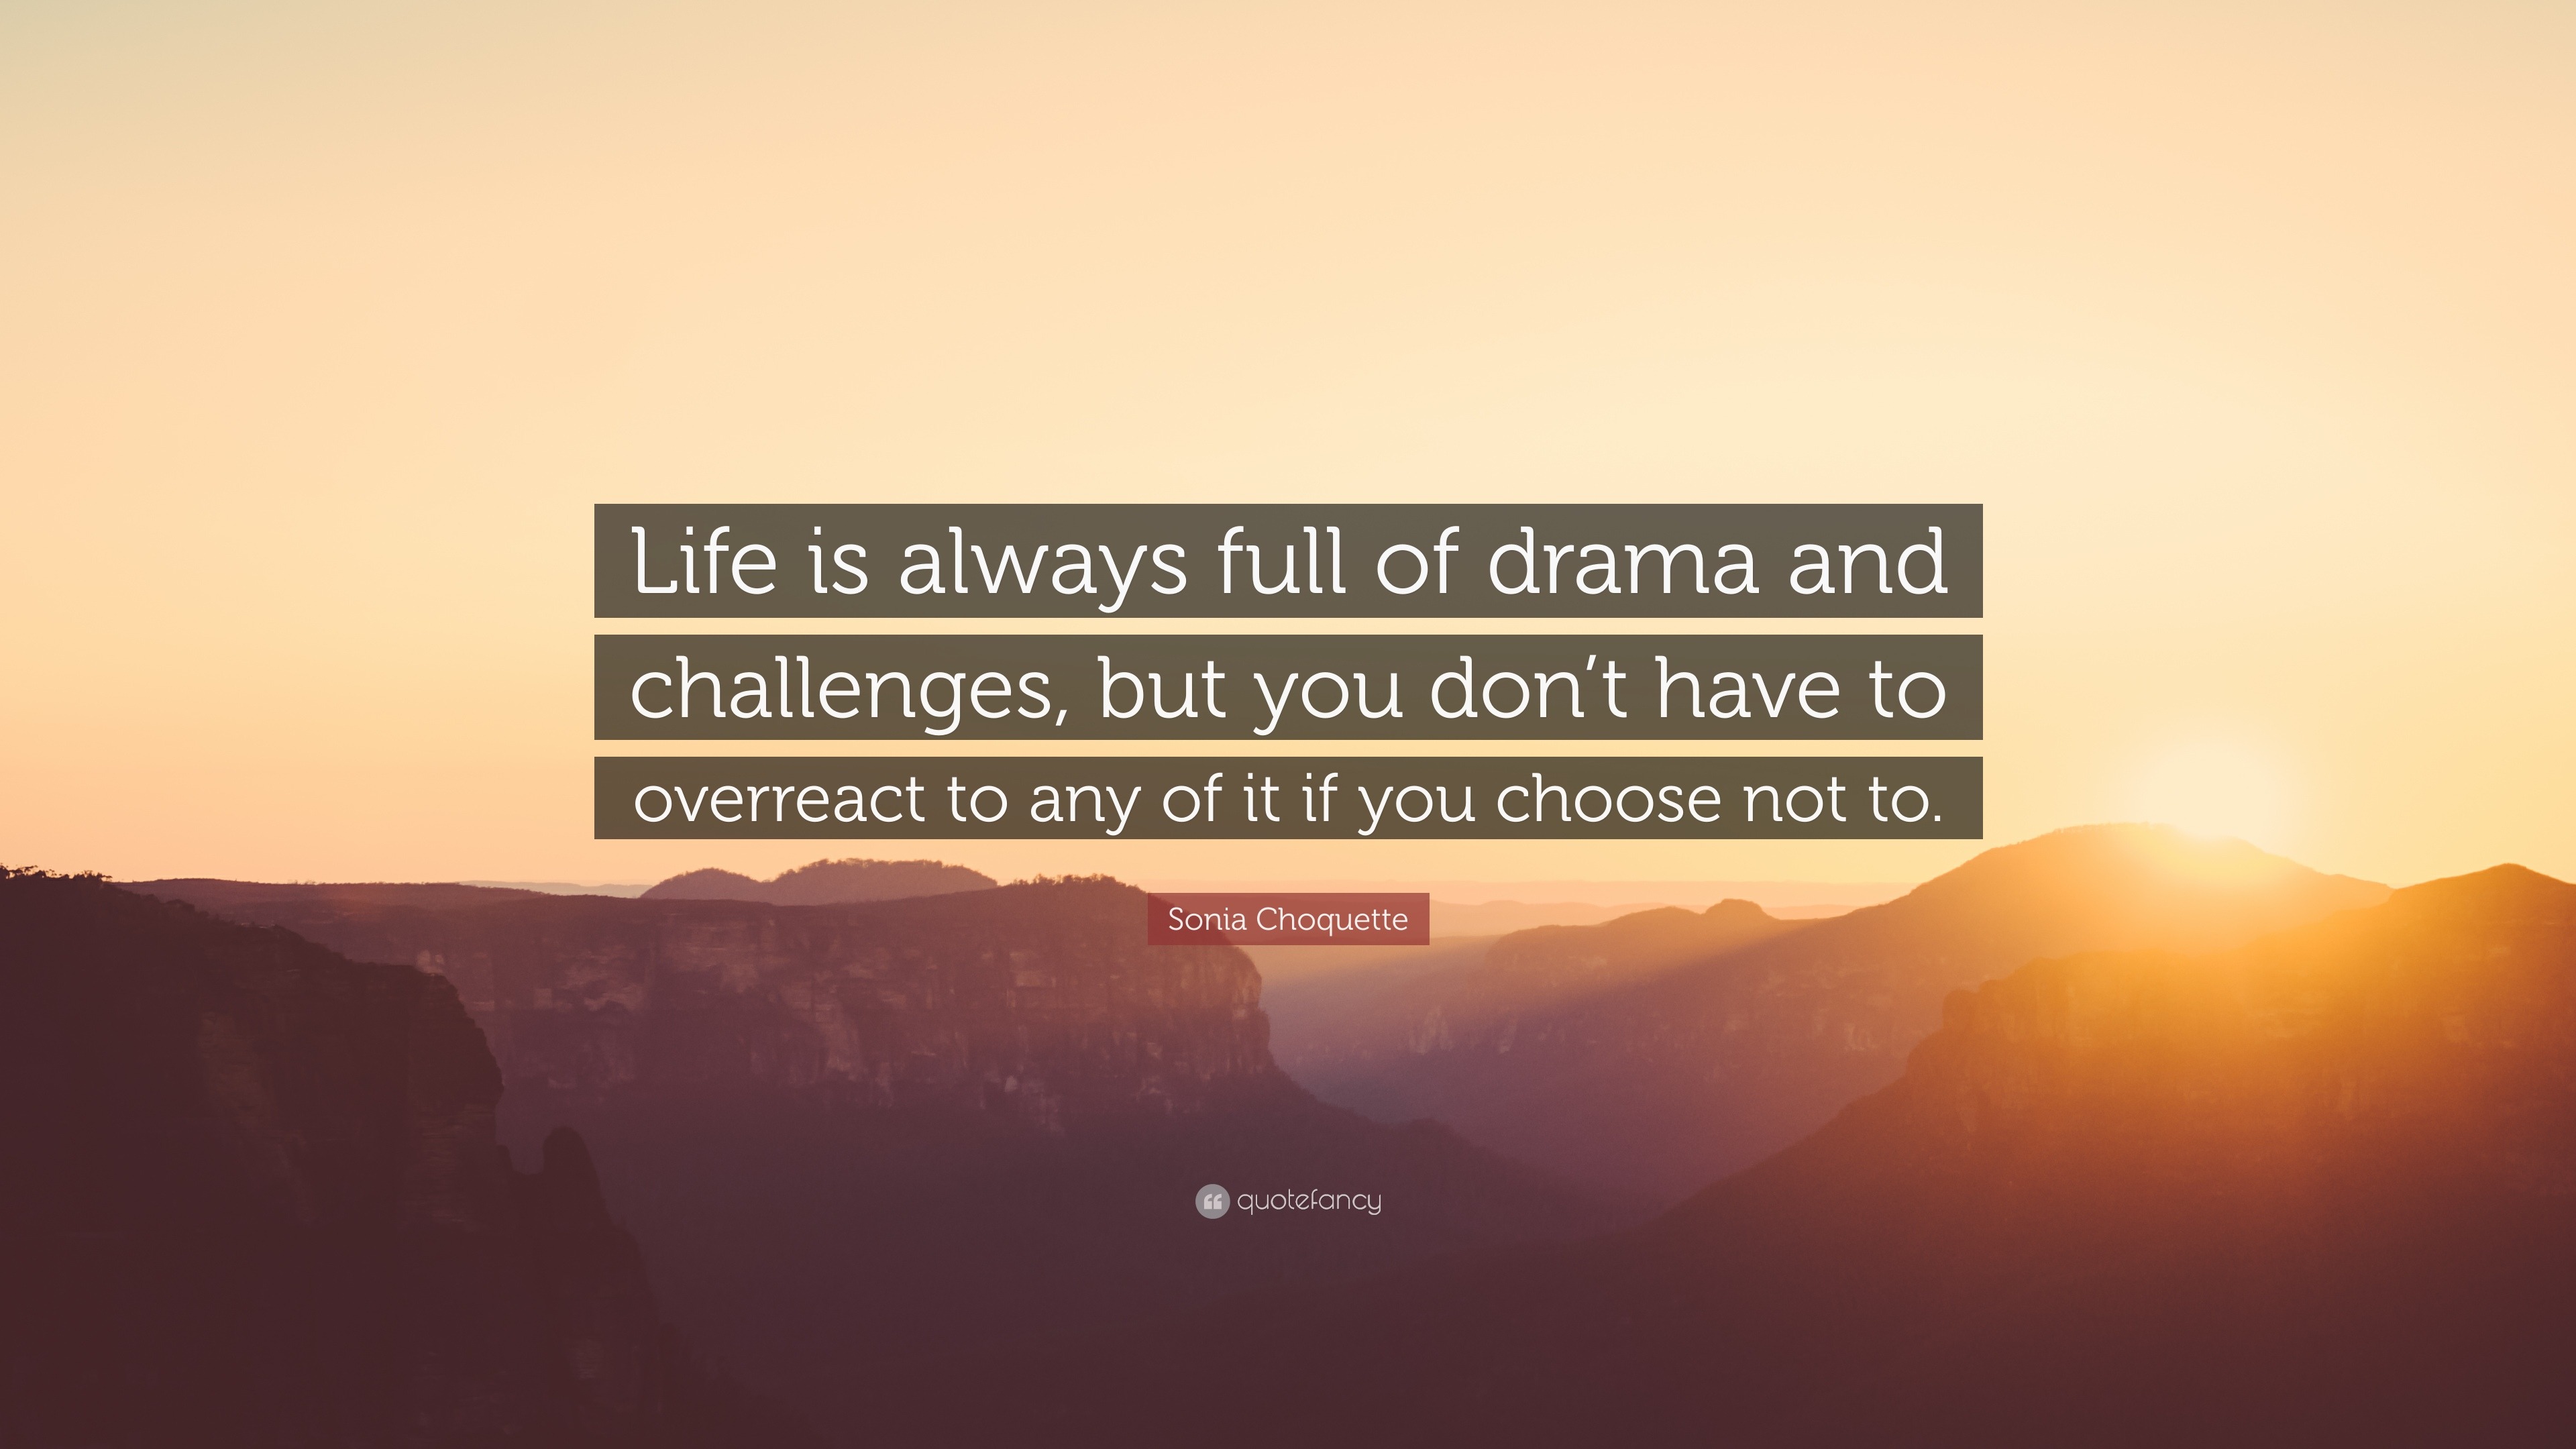 Sonia Choquette Quote: “Life is always full of drama and